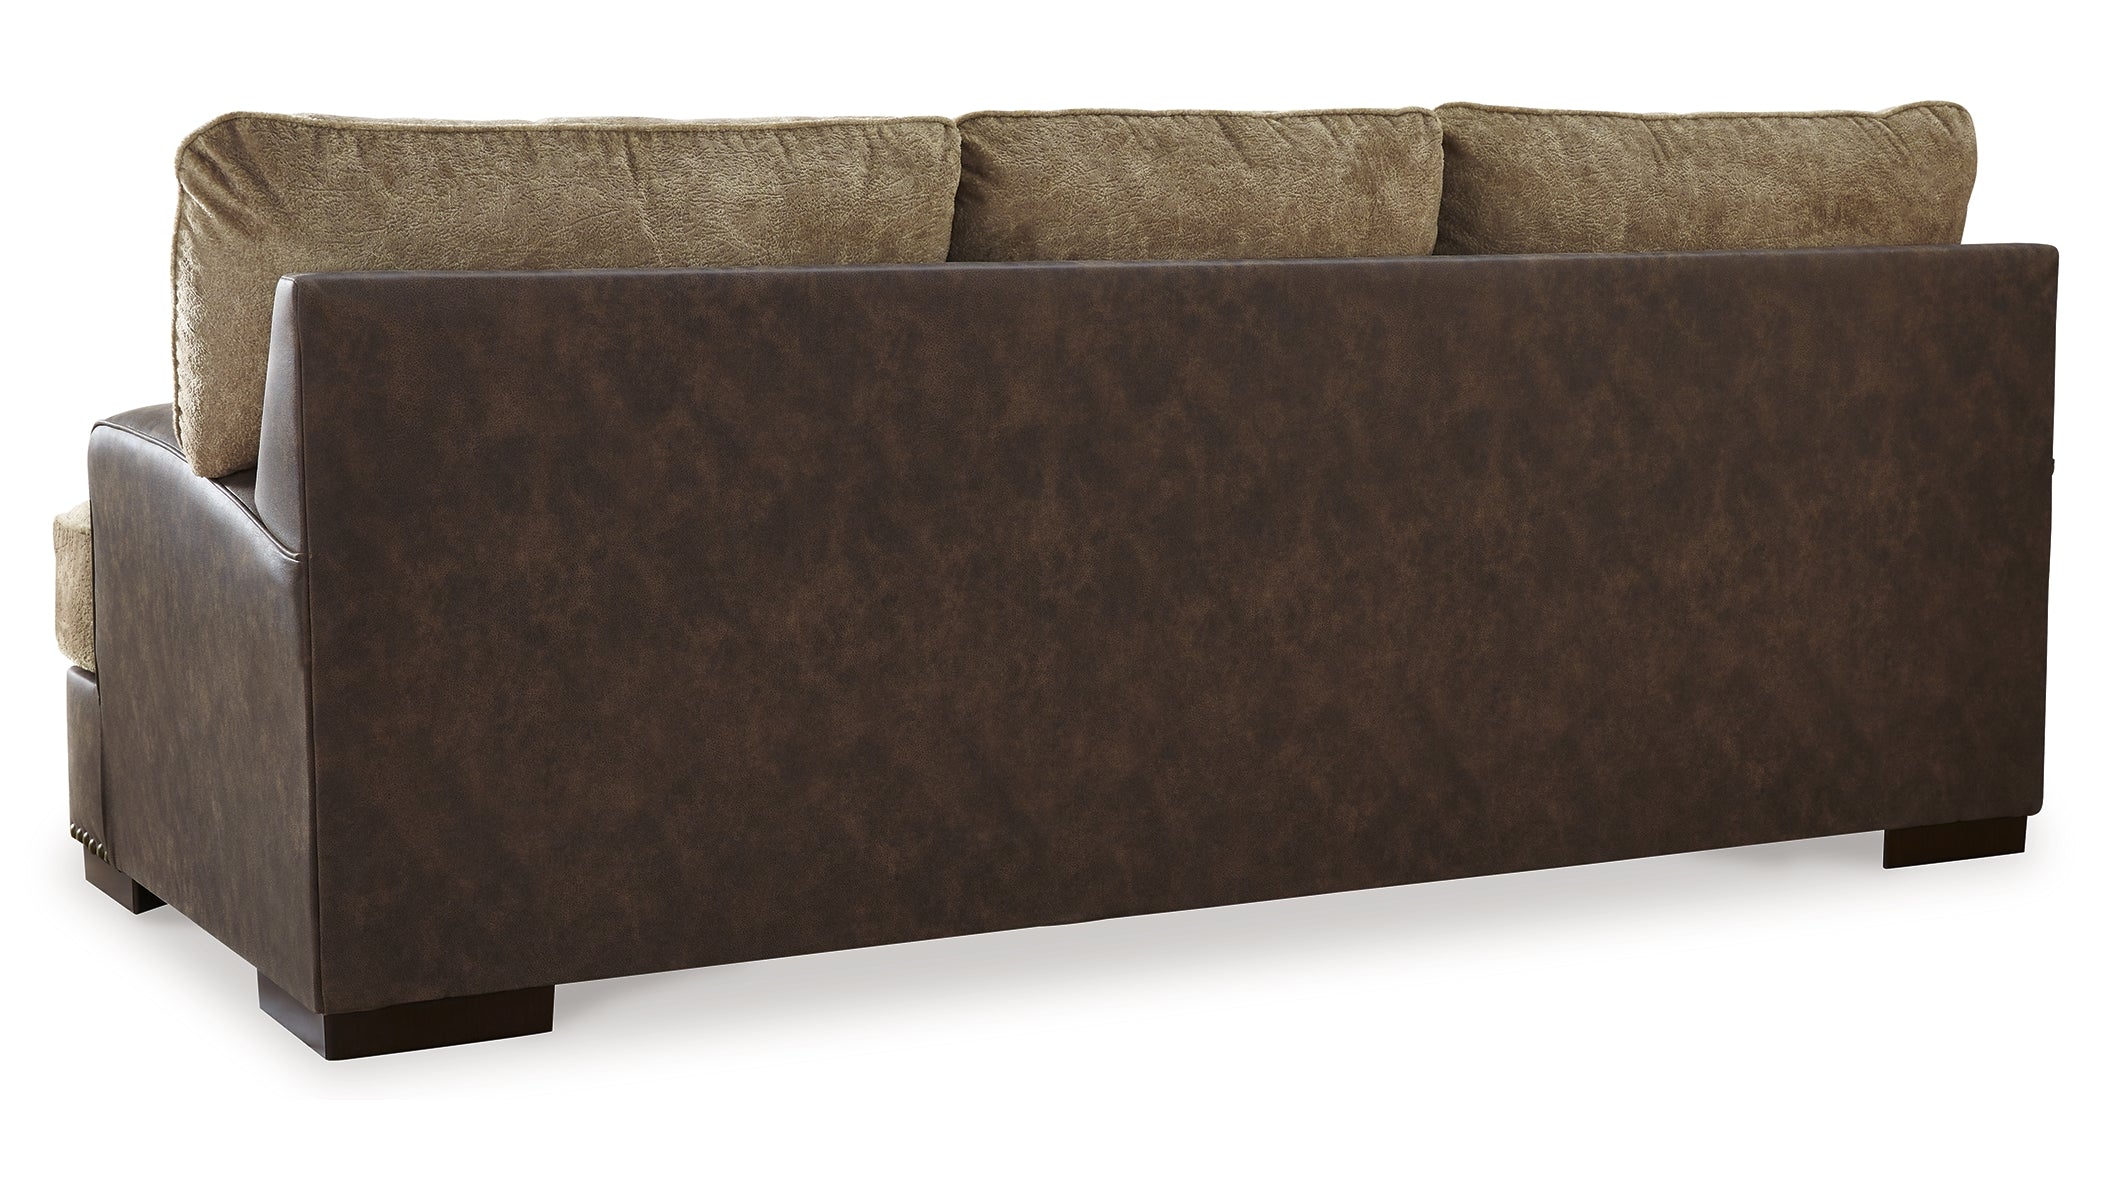 Alesbury Sofa, Loveseat, Chair and Ottoman